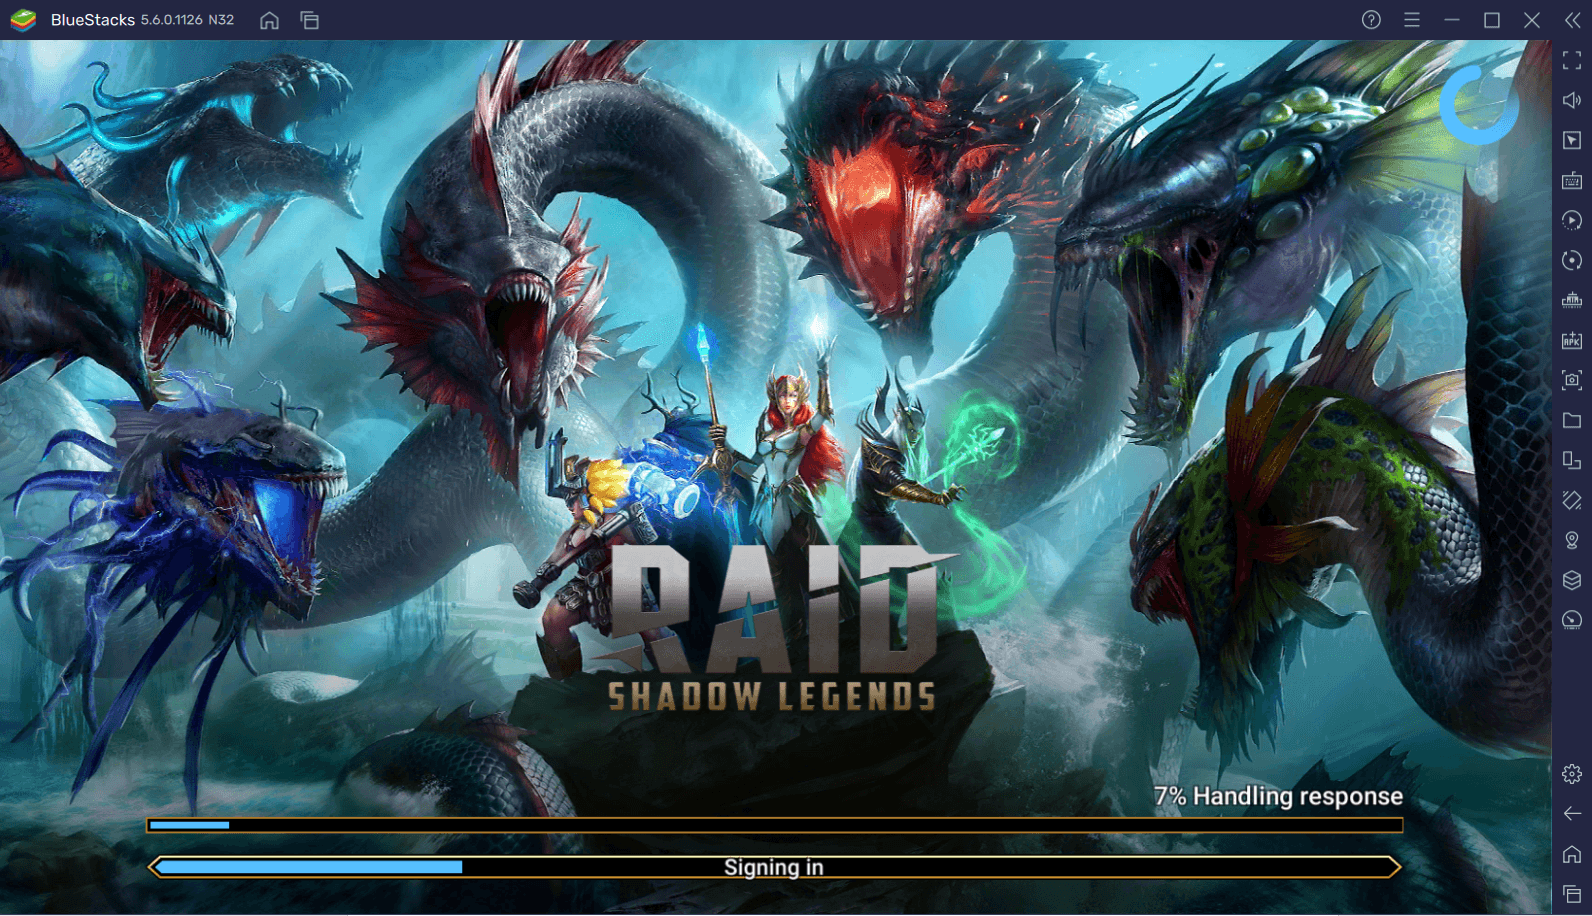 RAID: Shadow Legends – Champion Skins, New Clan Shop Items, and Balance Changes in Patch 5.30